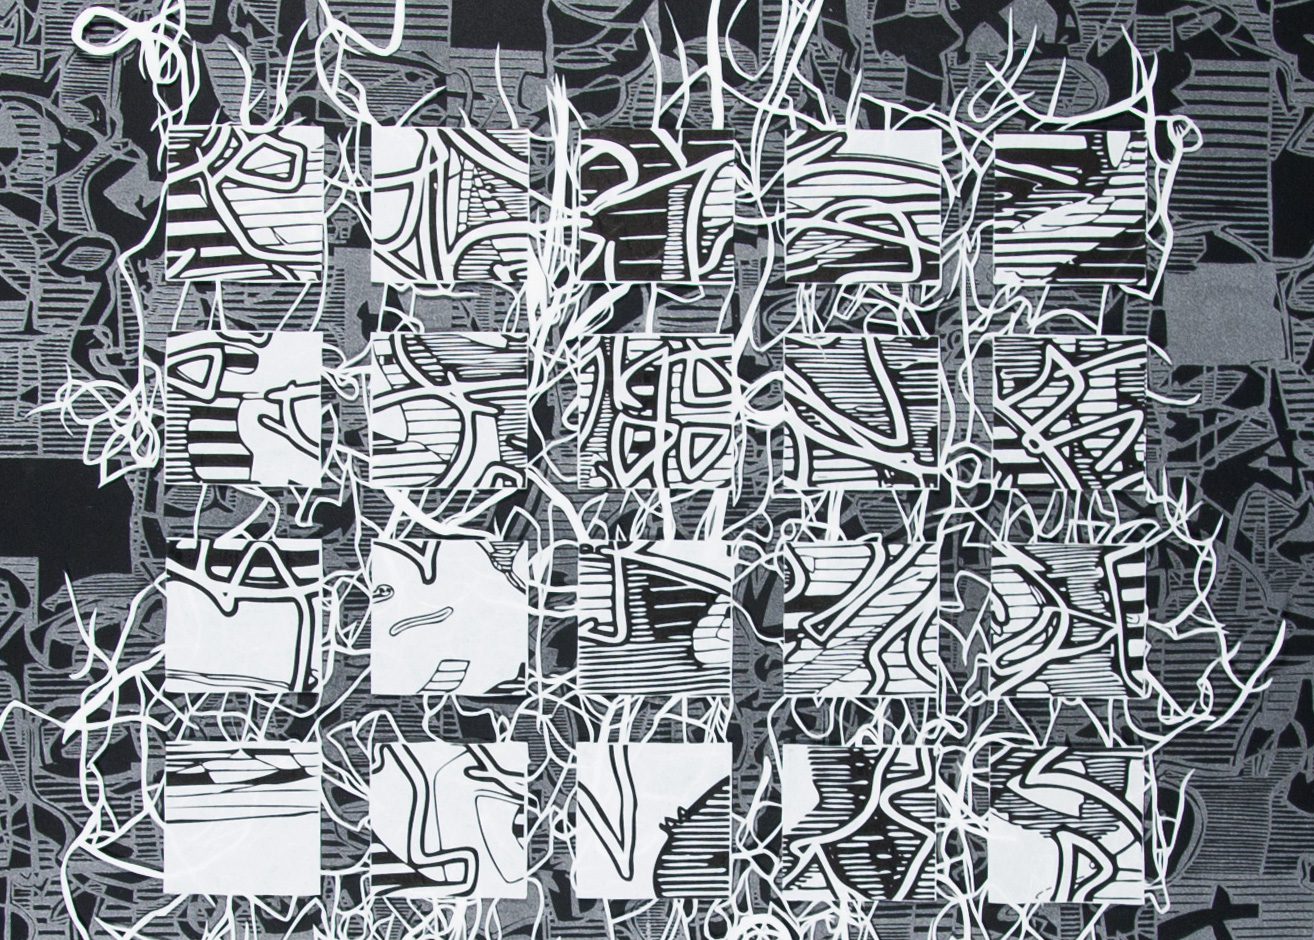 A black and white picture of many different types of graffiti.